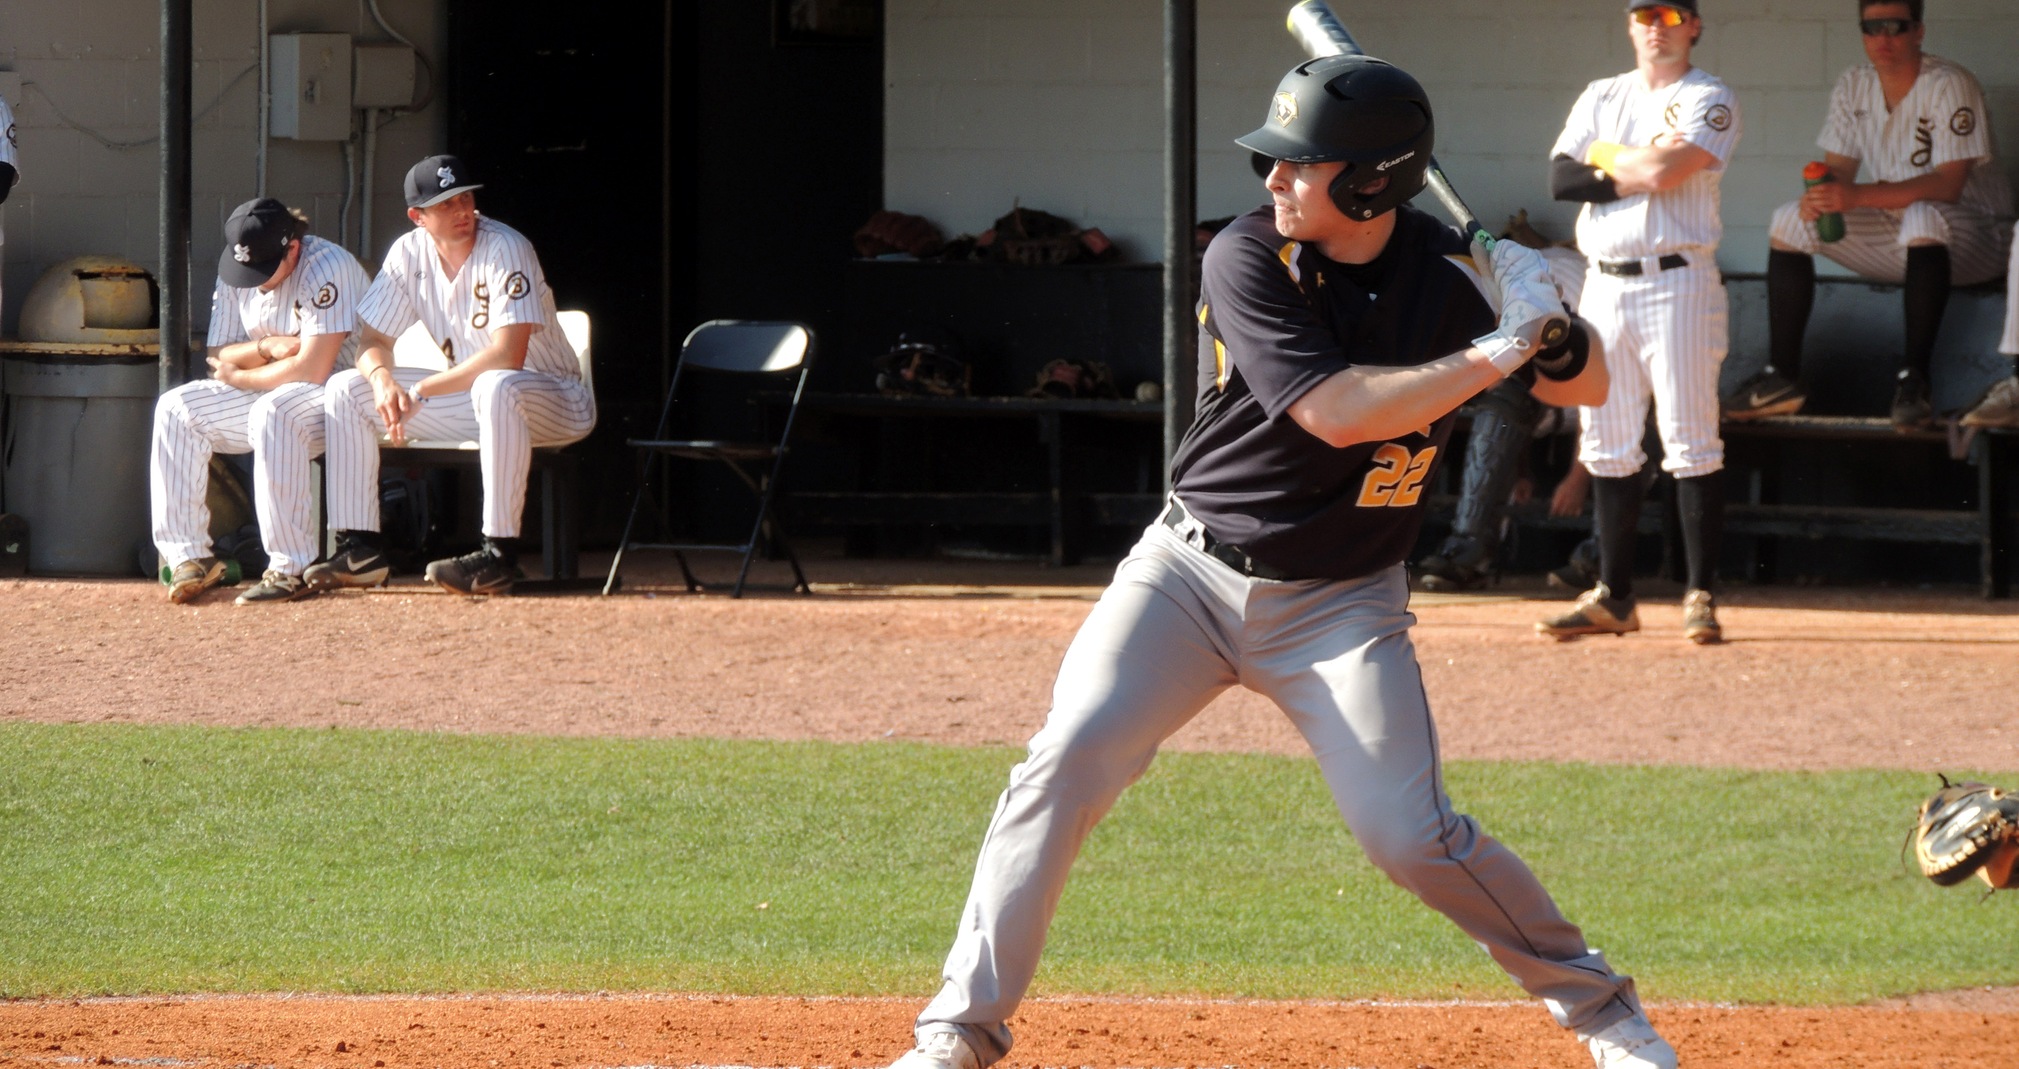 Jensen Hinton cut UW-Oshkosh's deficit to 2-1 with a second-inning double.